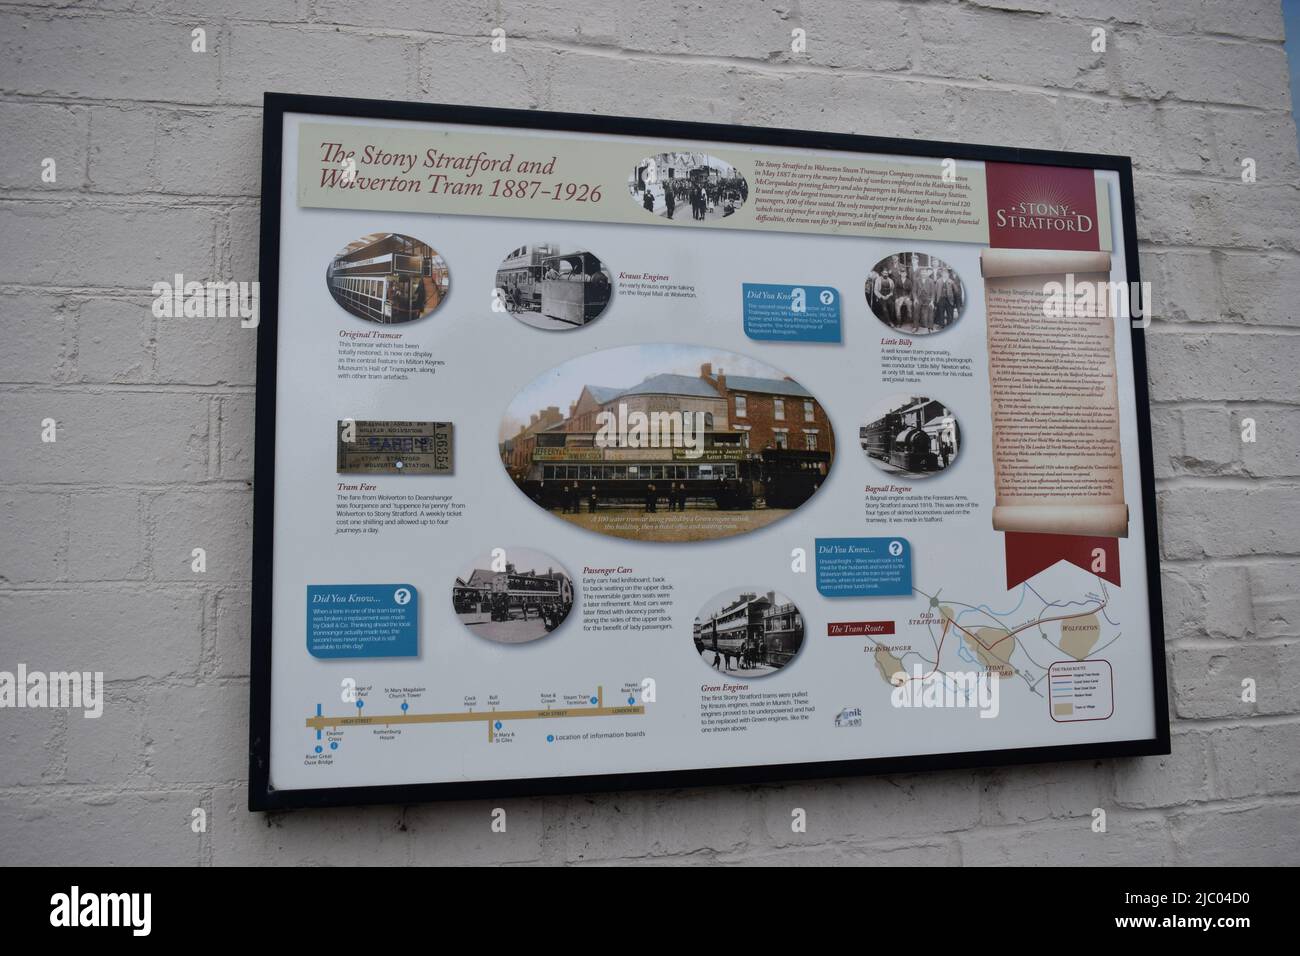 Information board about the Stony Stratford and Wolverton Tram 1887 - 1926. Stock Photo